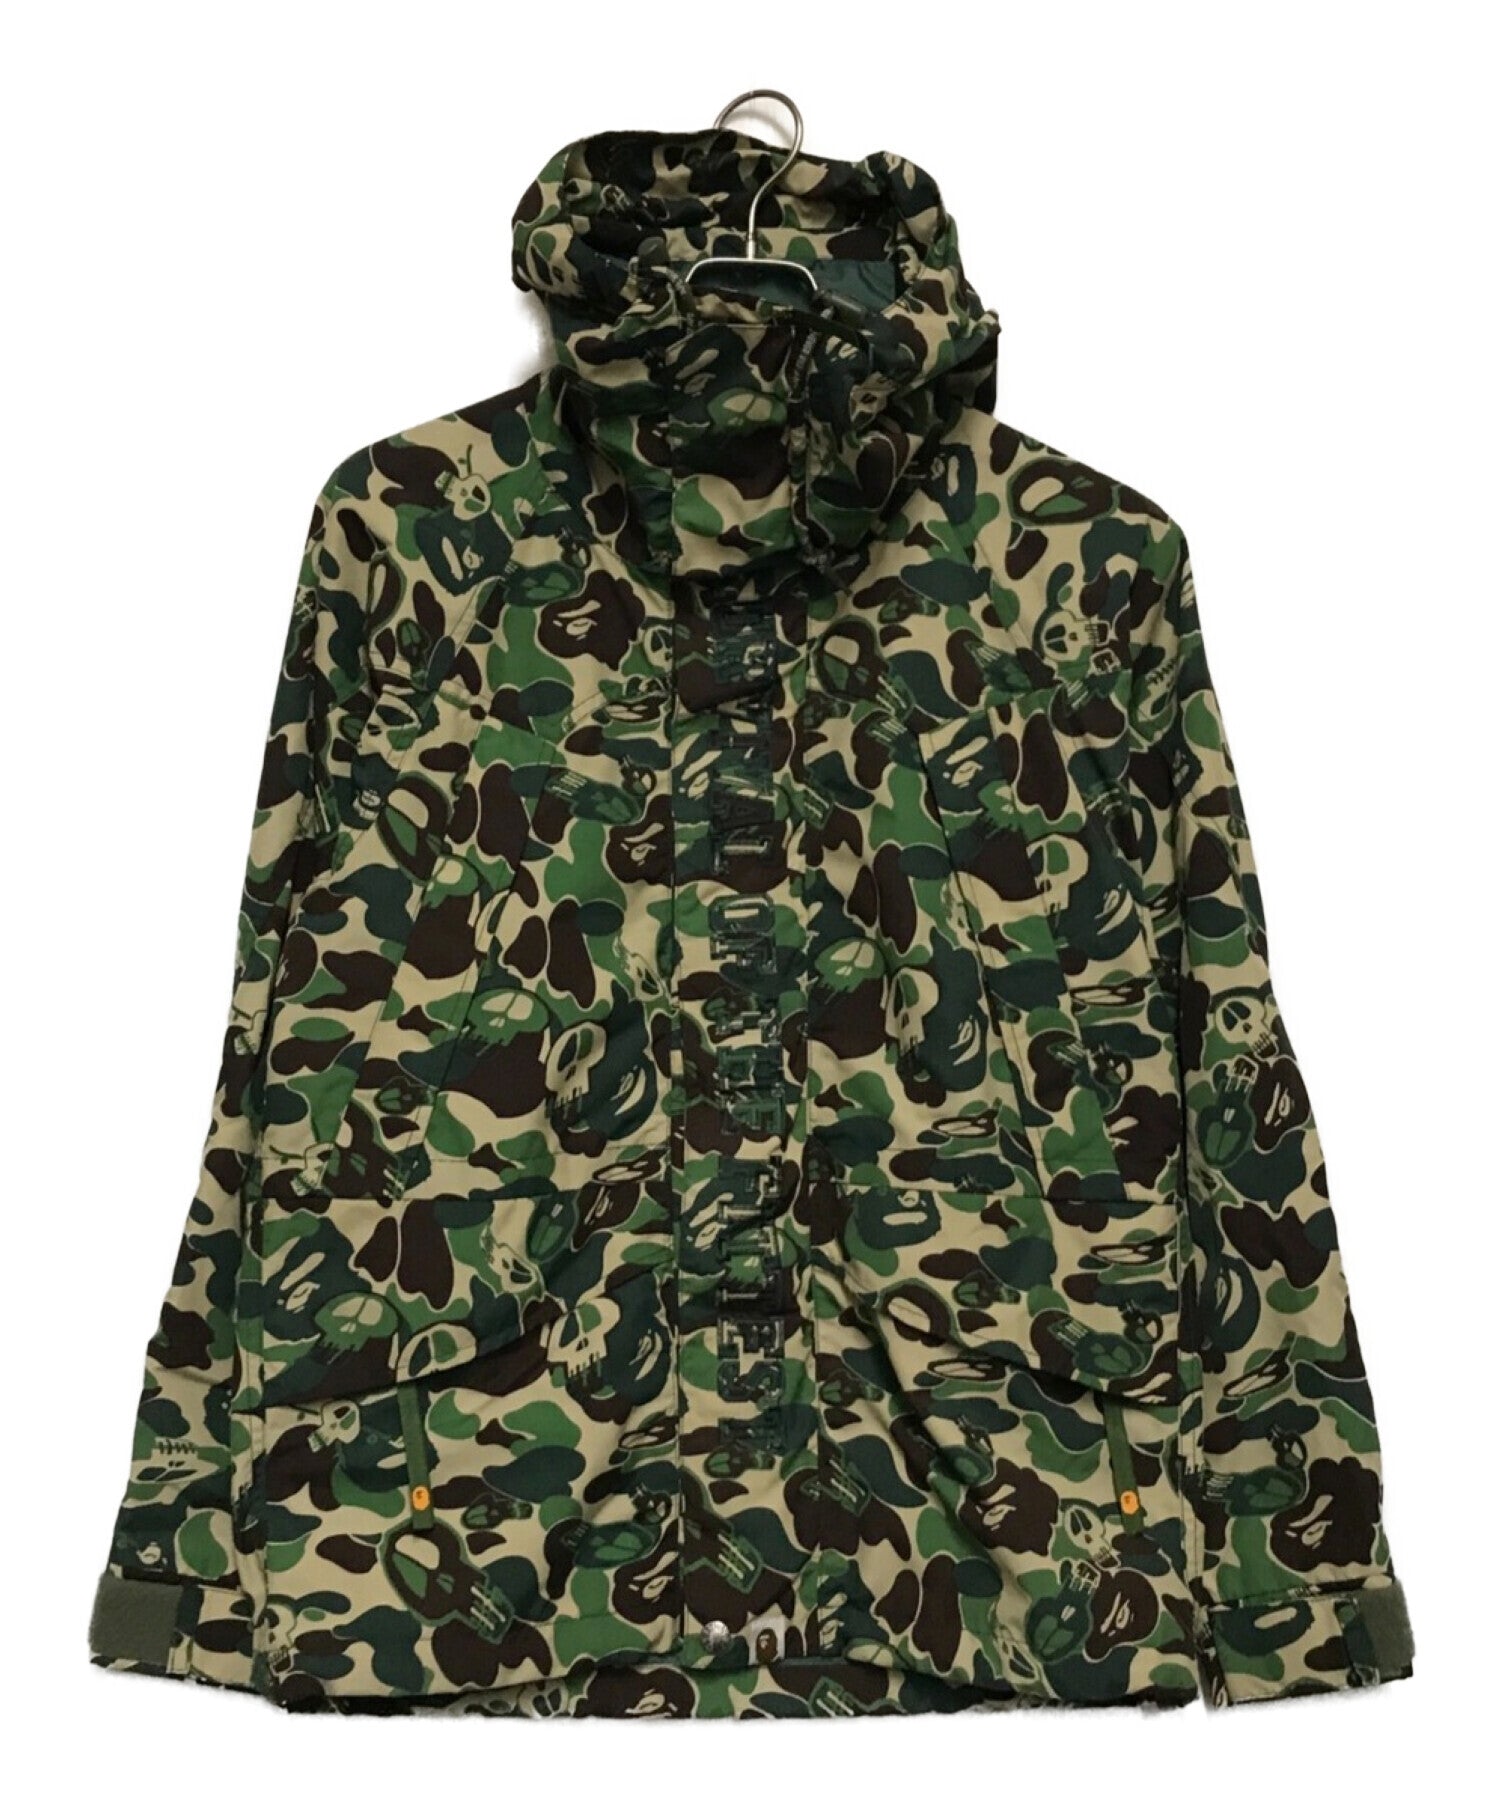 A BATHING APE×STUSSY snowboard jacket | Archive Factory